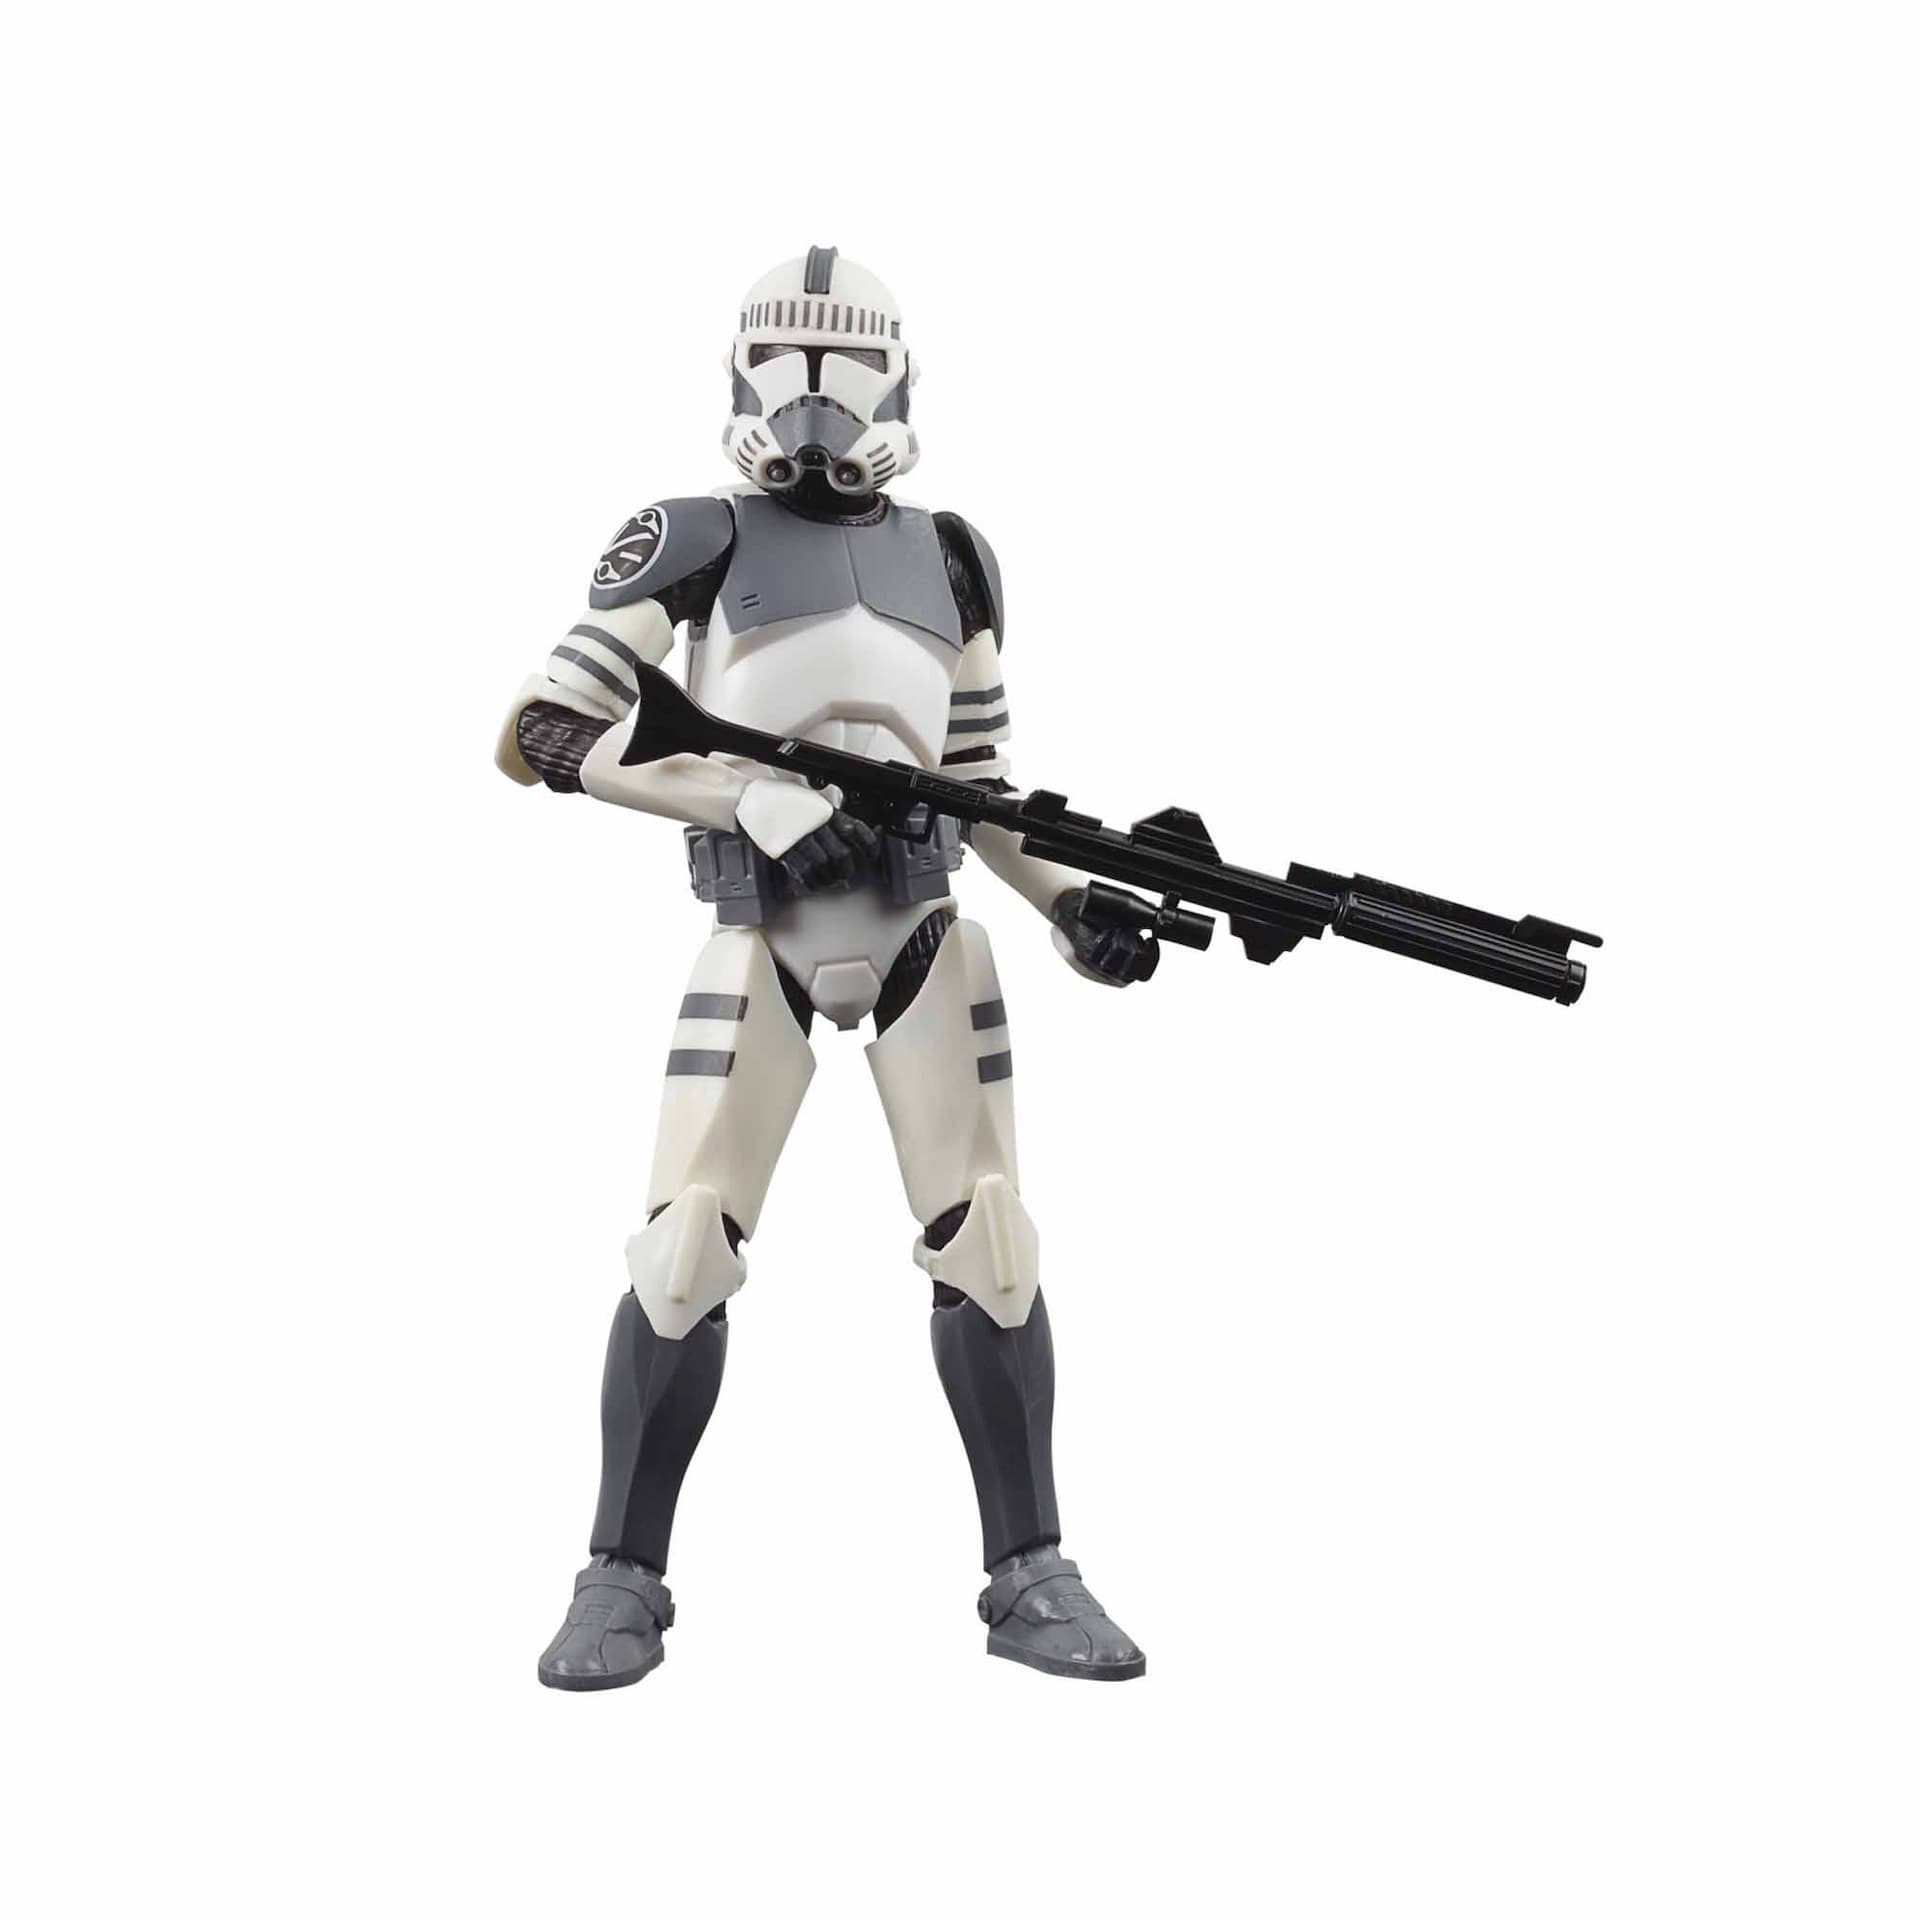 Star Wars The Black Series Clone Trooper (Kamino) Toy 6-Inch-Scale Star Wars: The Clone Wars Figure, Kids Ages 4 and Up